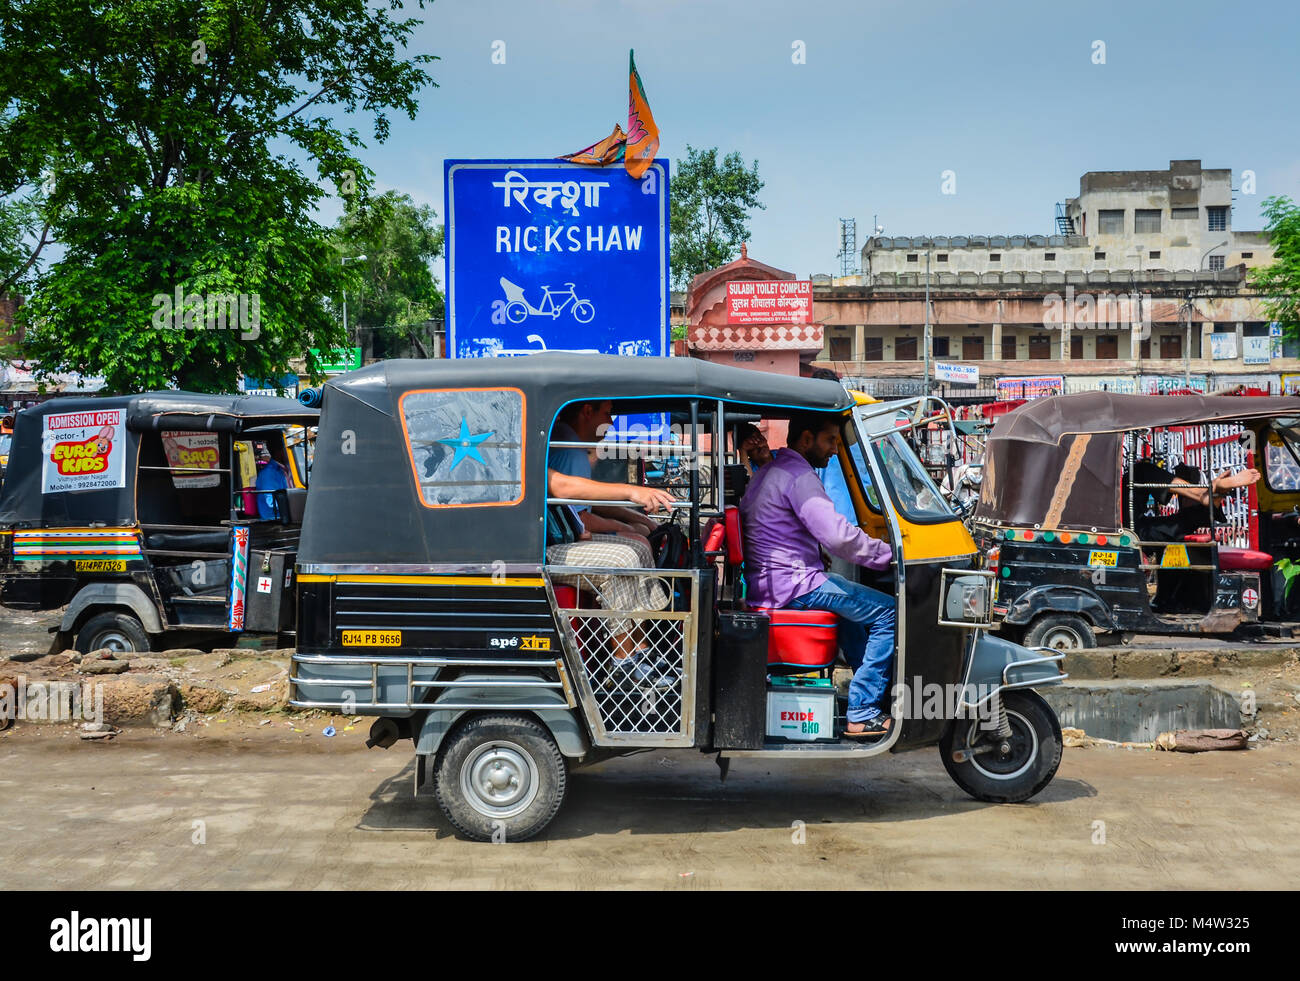 Auto rickshaw getting ready to leave stand of parked rickshaws awaiting fares. Stock Photo